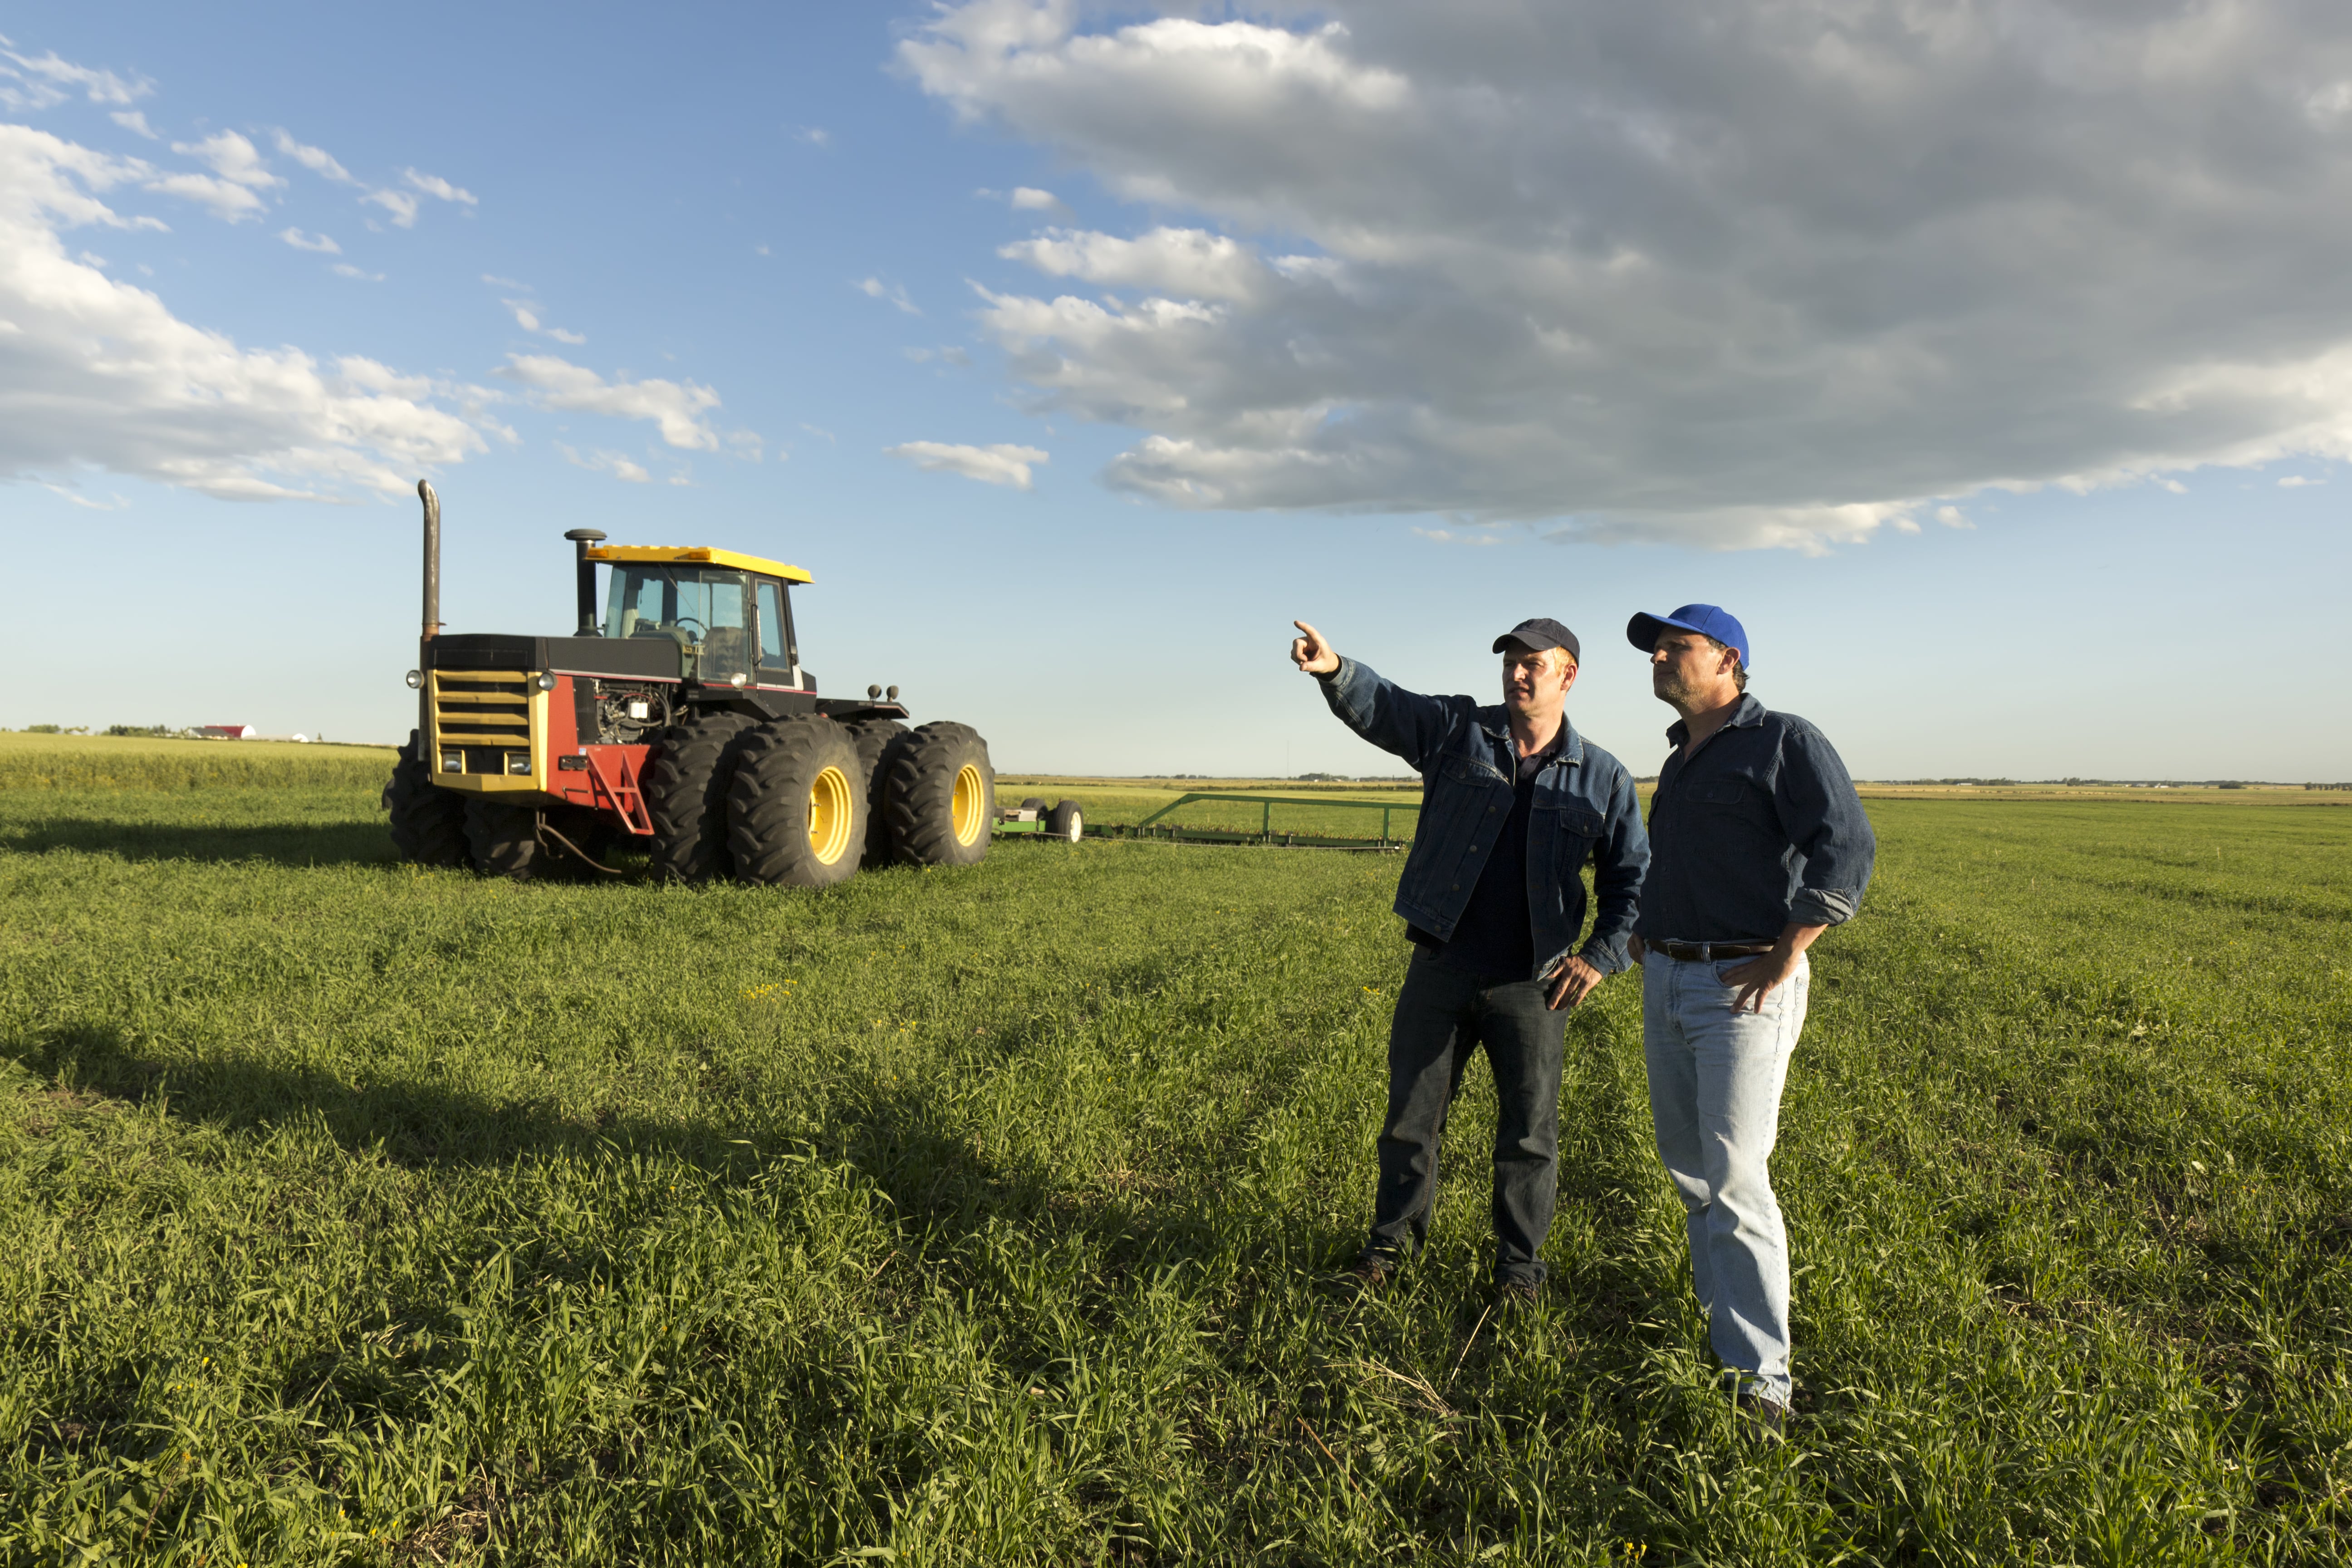 One person showing the horizon to another one in a grass field in front of a tractor